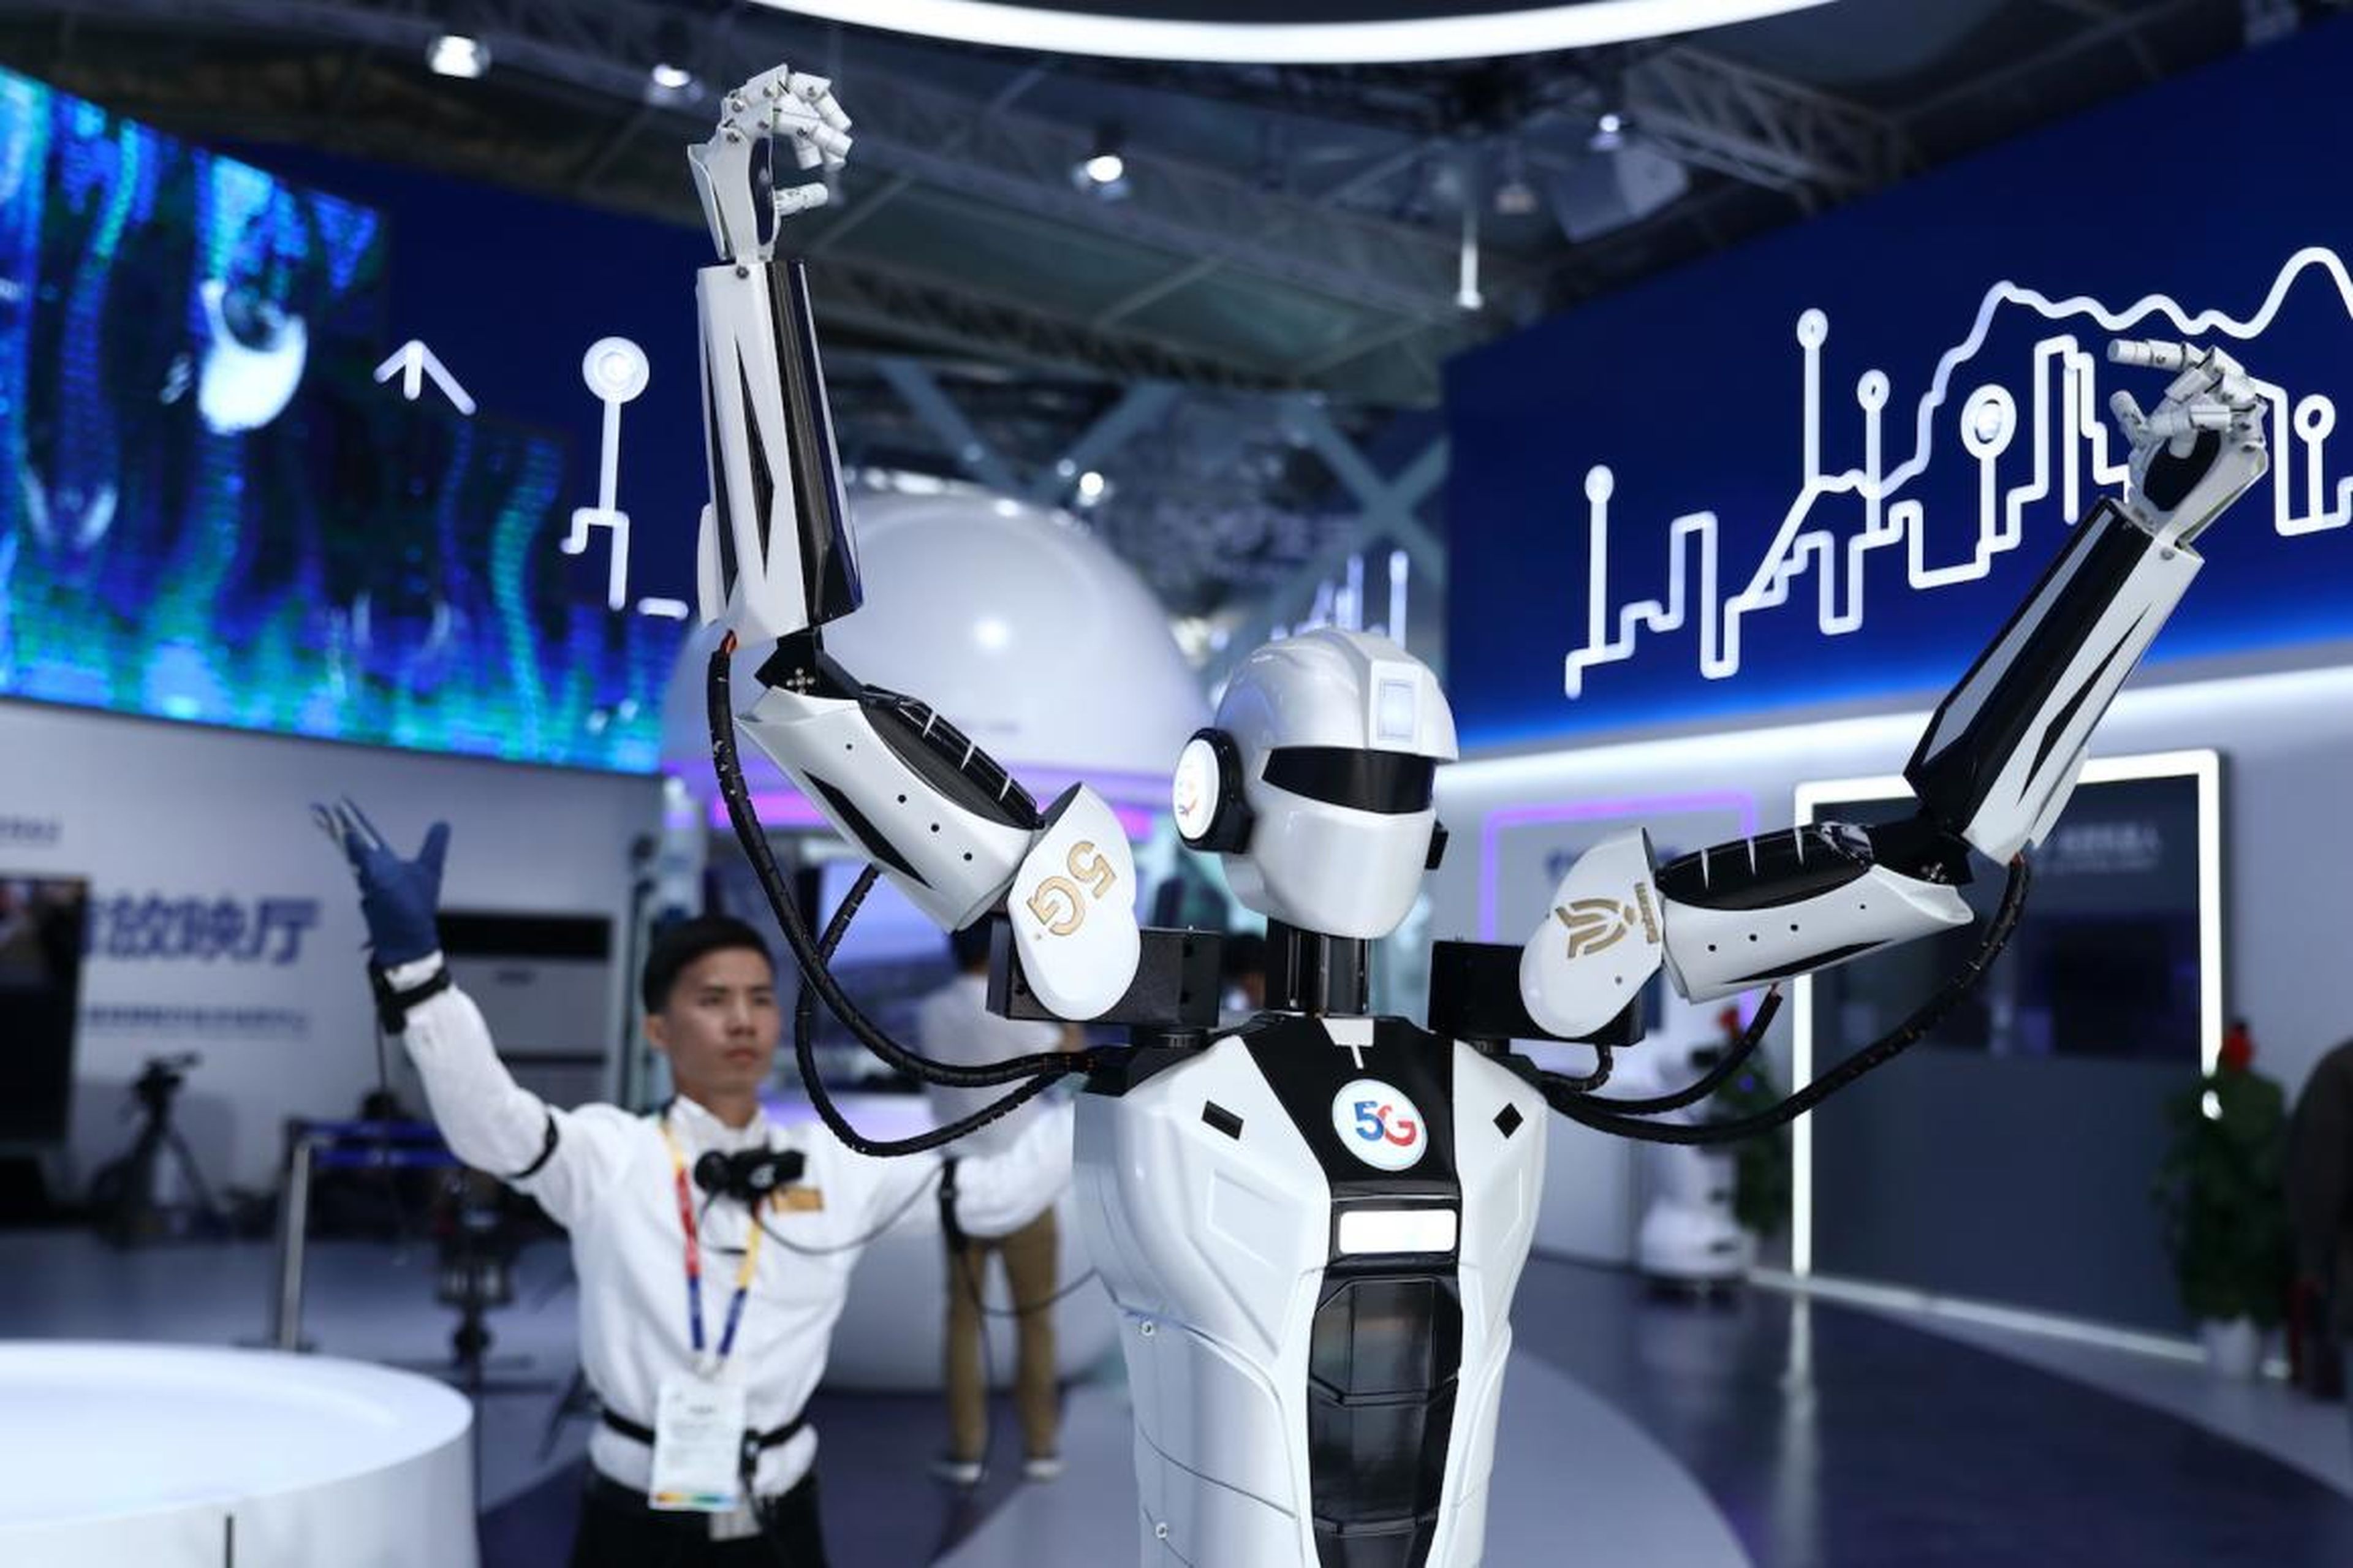 An intelligent robot copies the movement of a visitor wearing sensor suit during the opening of 2019 Beijing International Horticultural Exhibition.